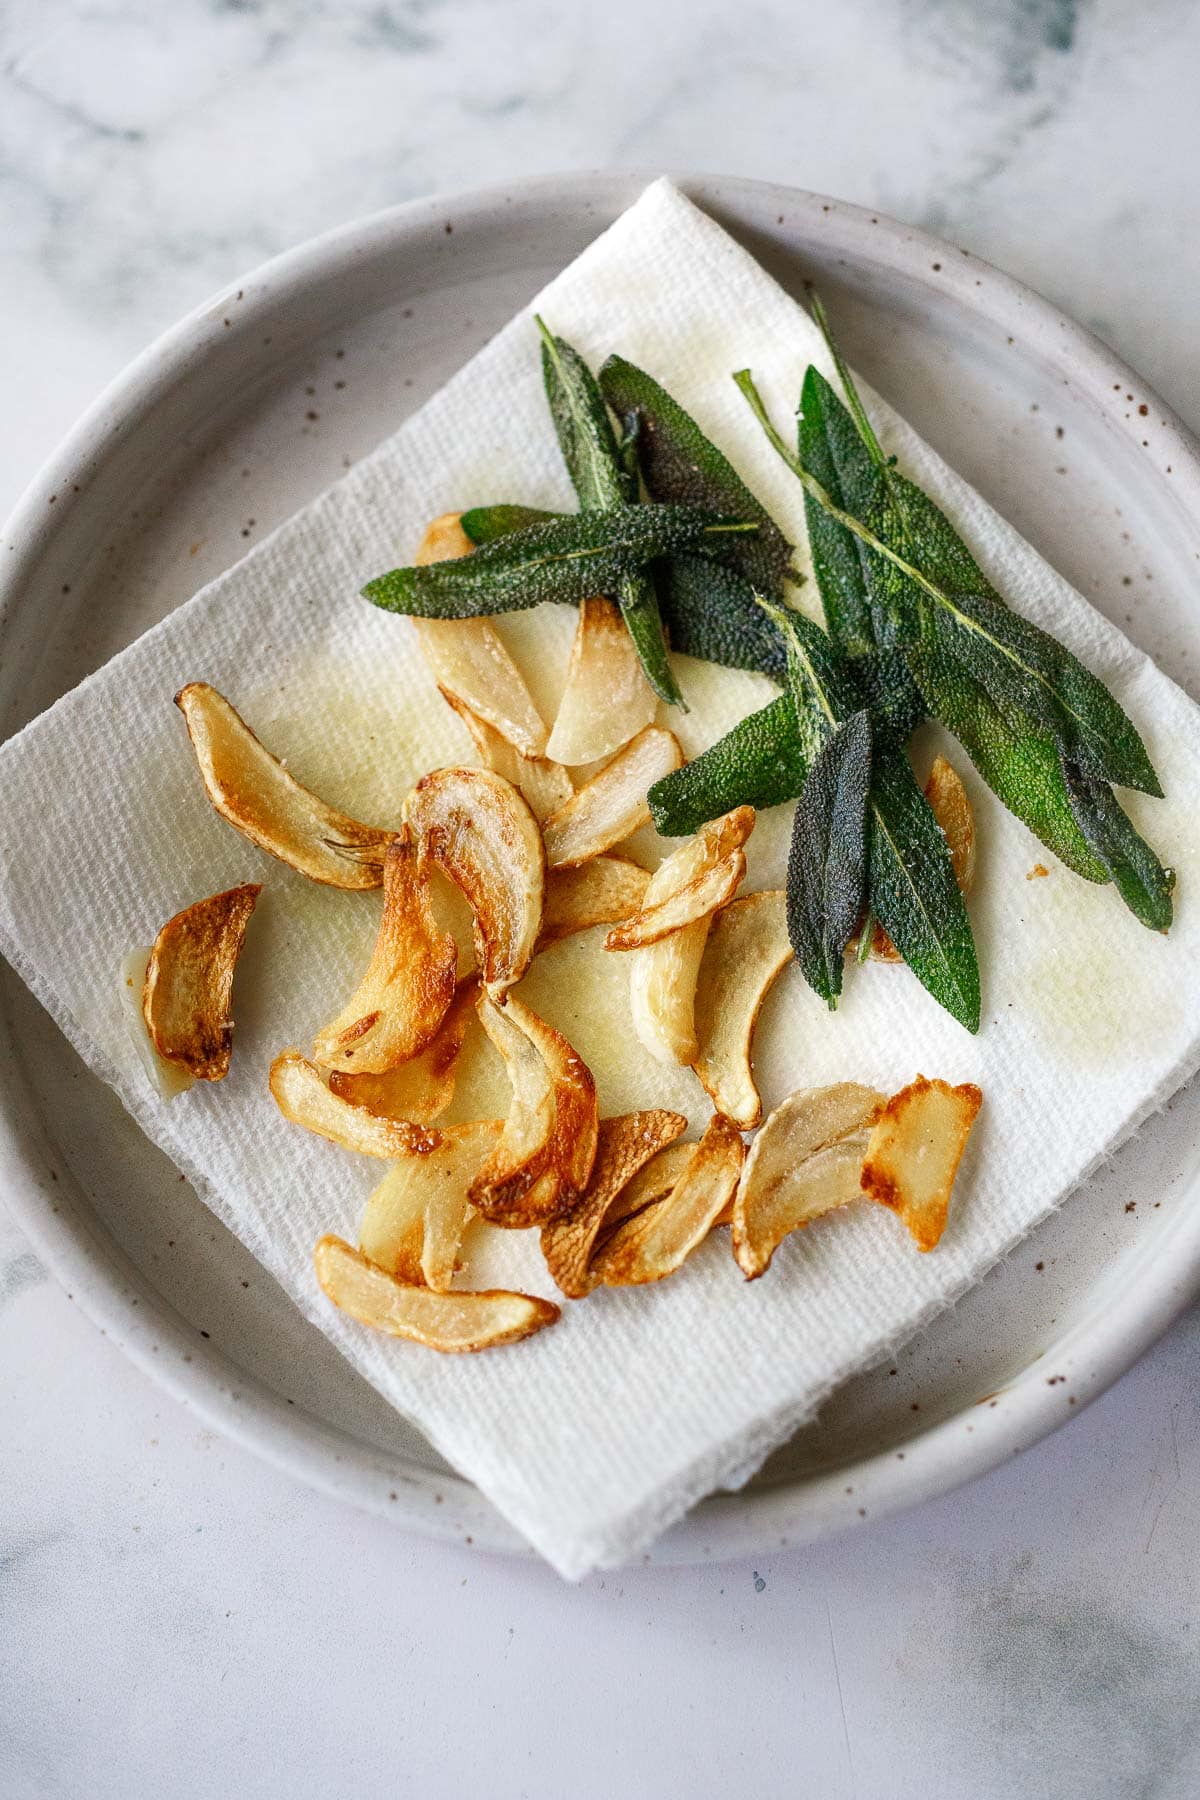 garlic chips and crispy sage laid out on folded paper towel on ceramic plate